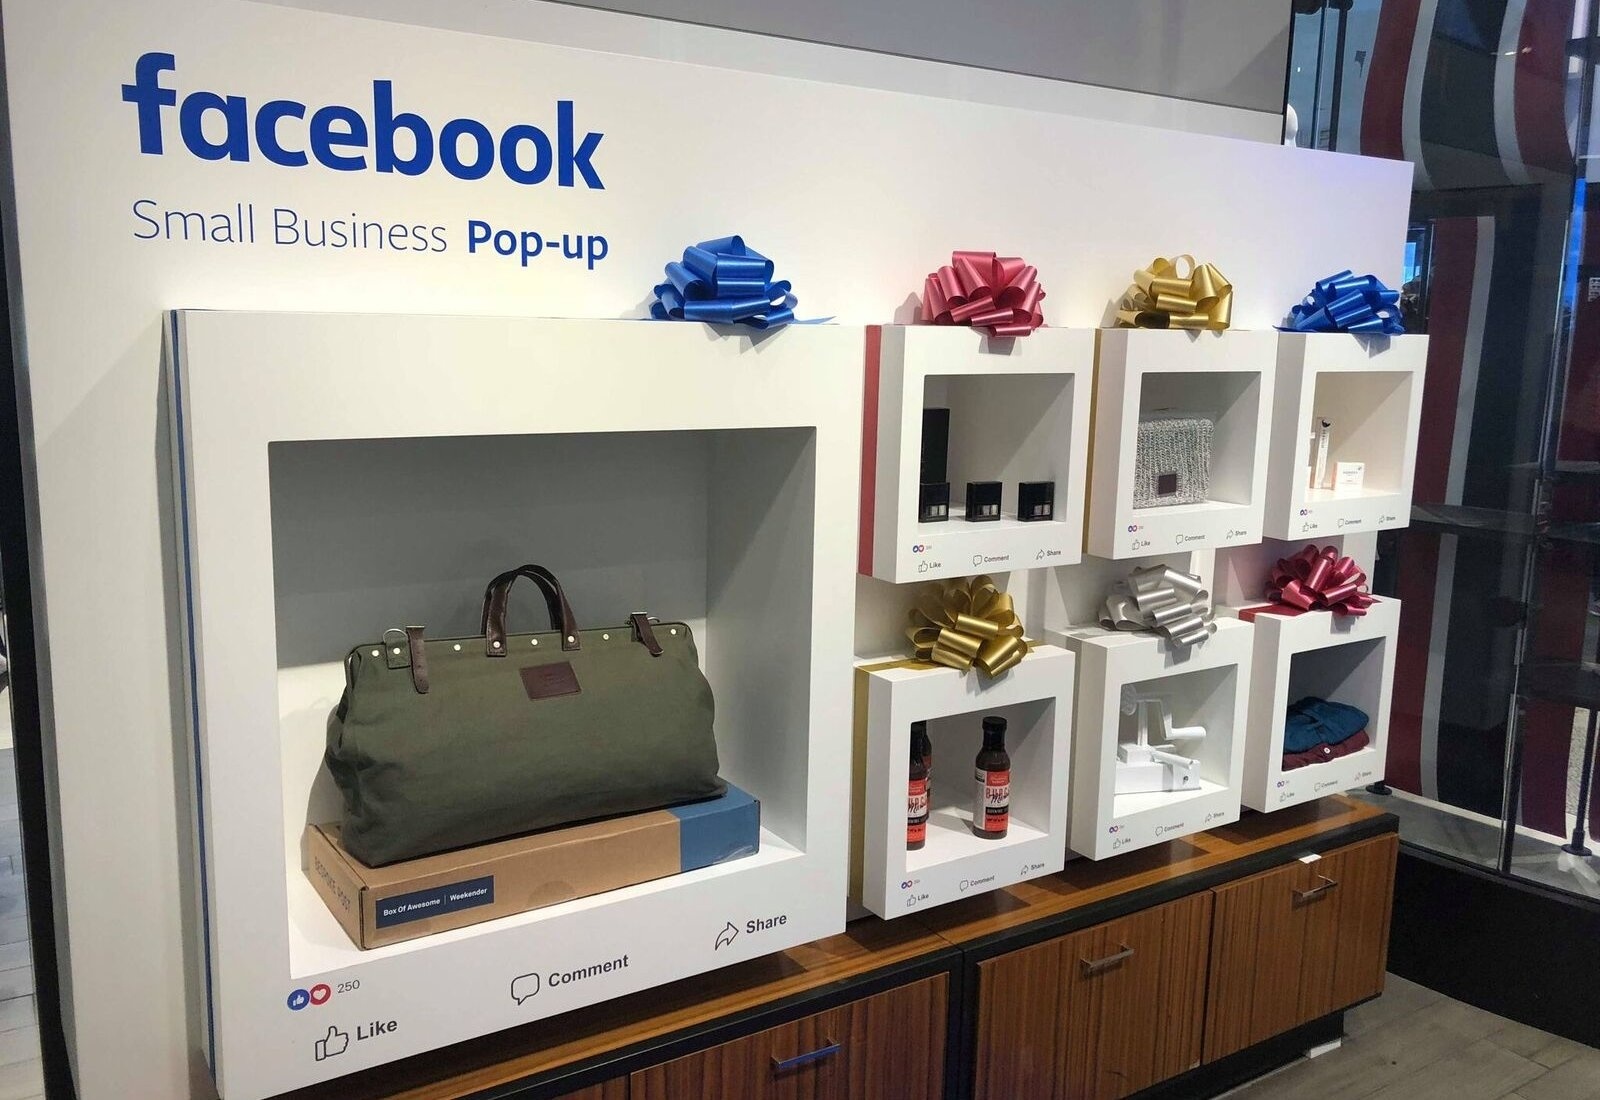 Small business goods on display in facebook pop up store, made to look like physical digital posts. 